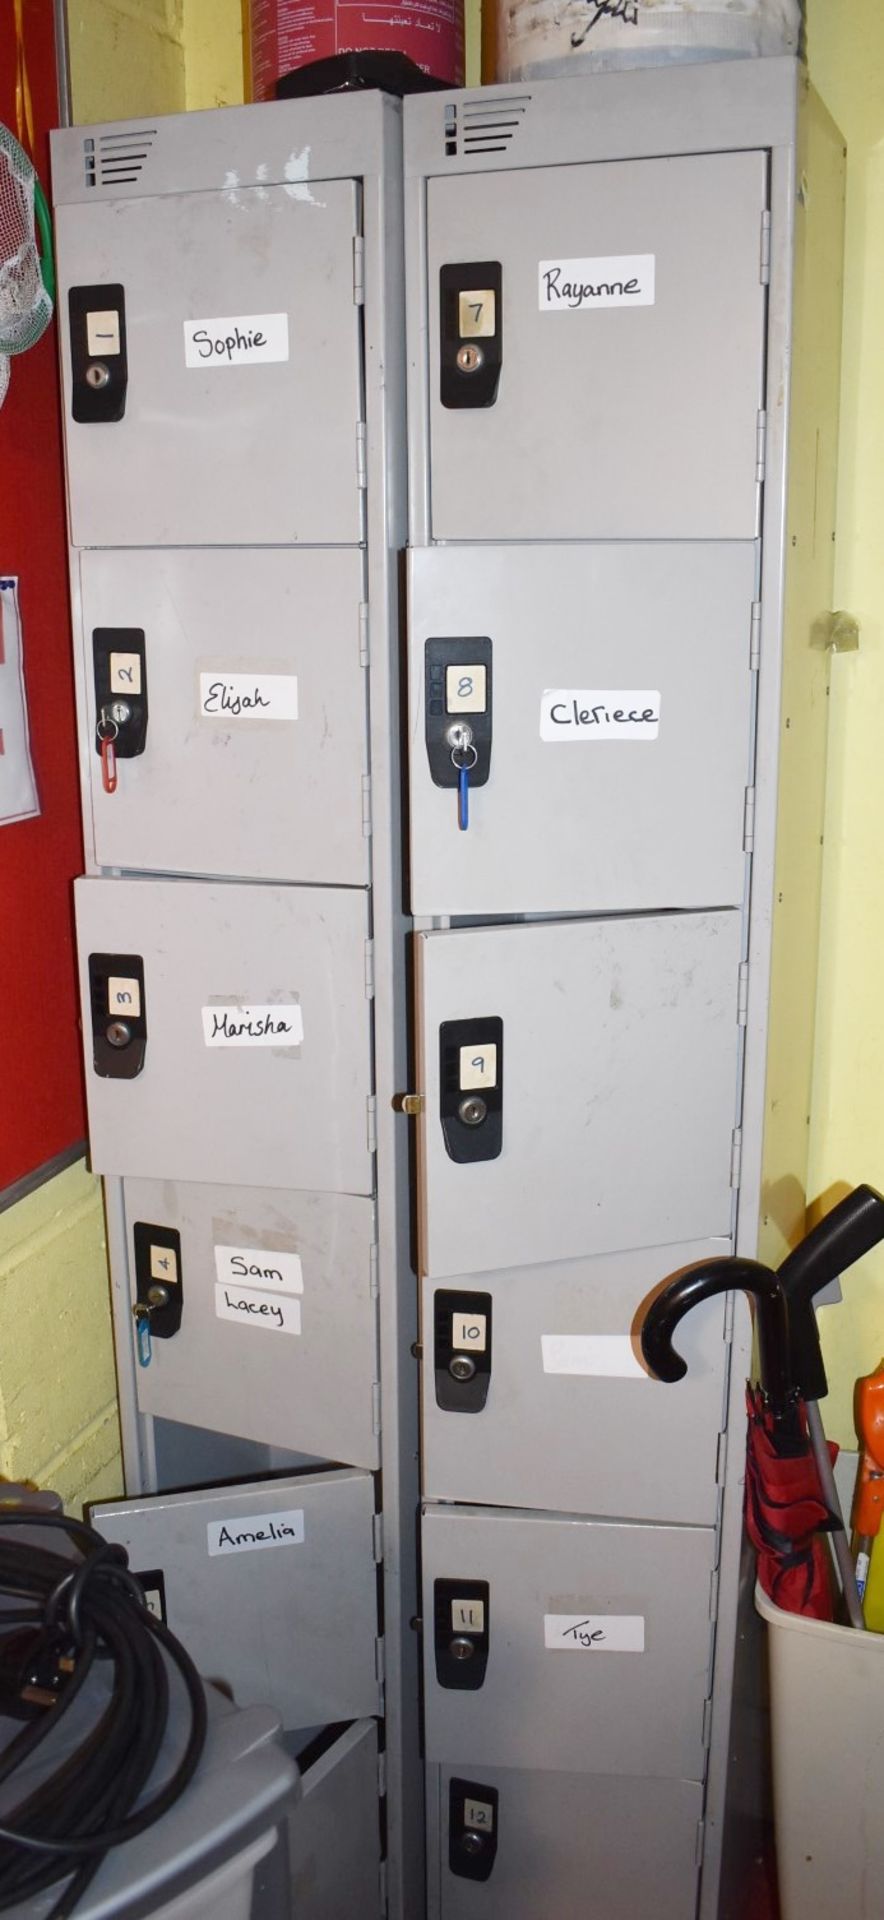 3 x Upright Staff Lockers - Some With Keys - Ref WW361 - CL520 - Location: London W10 More pictures,